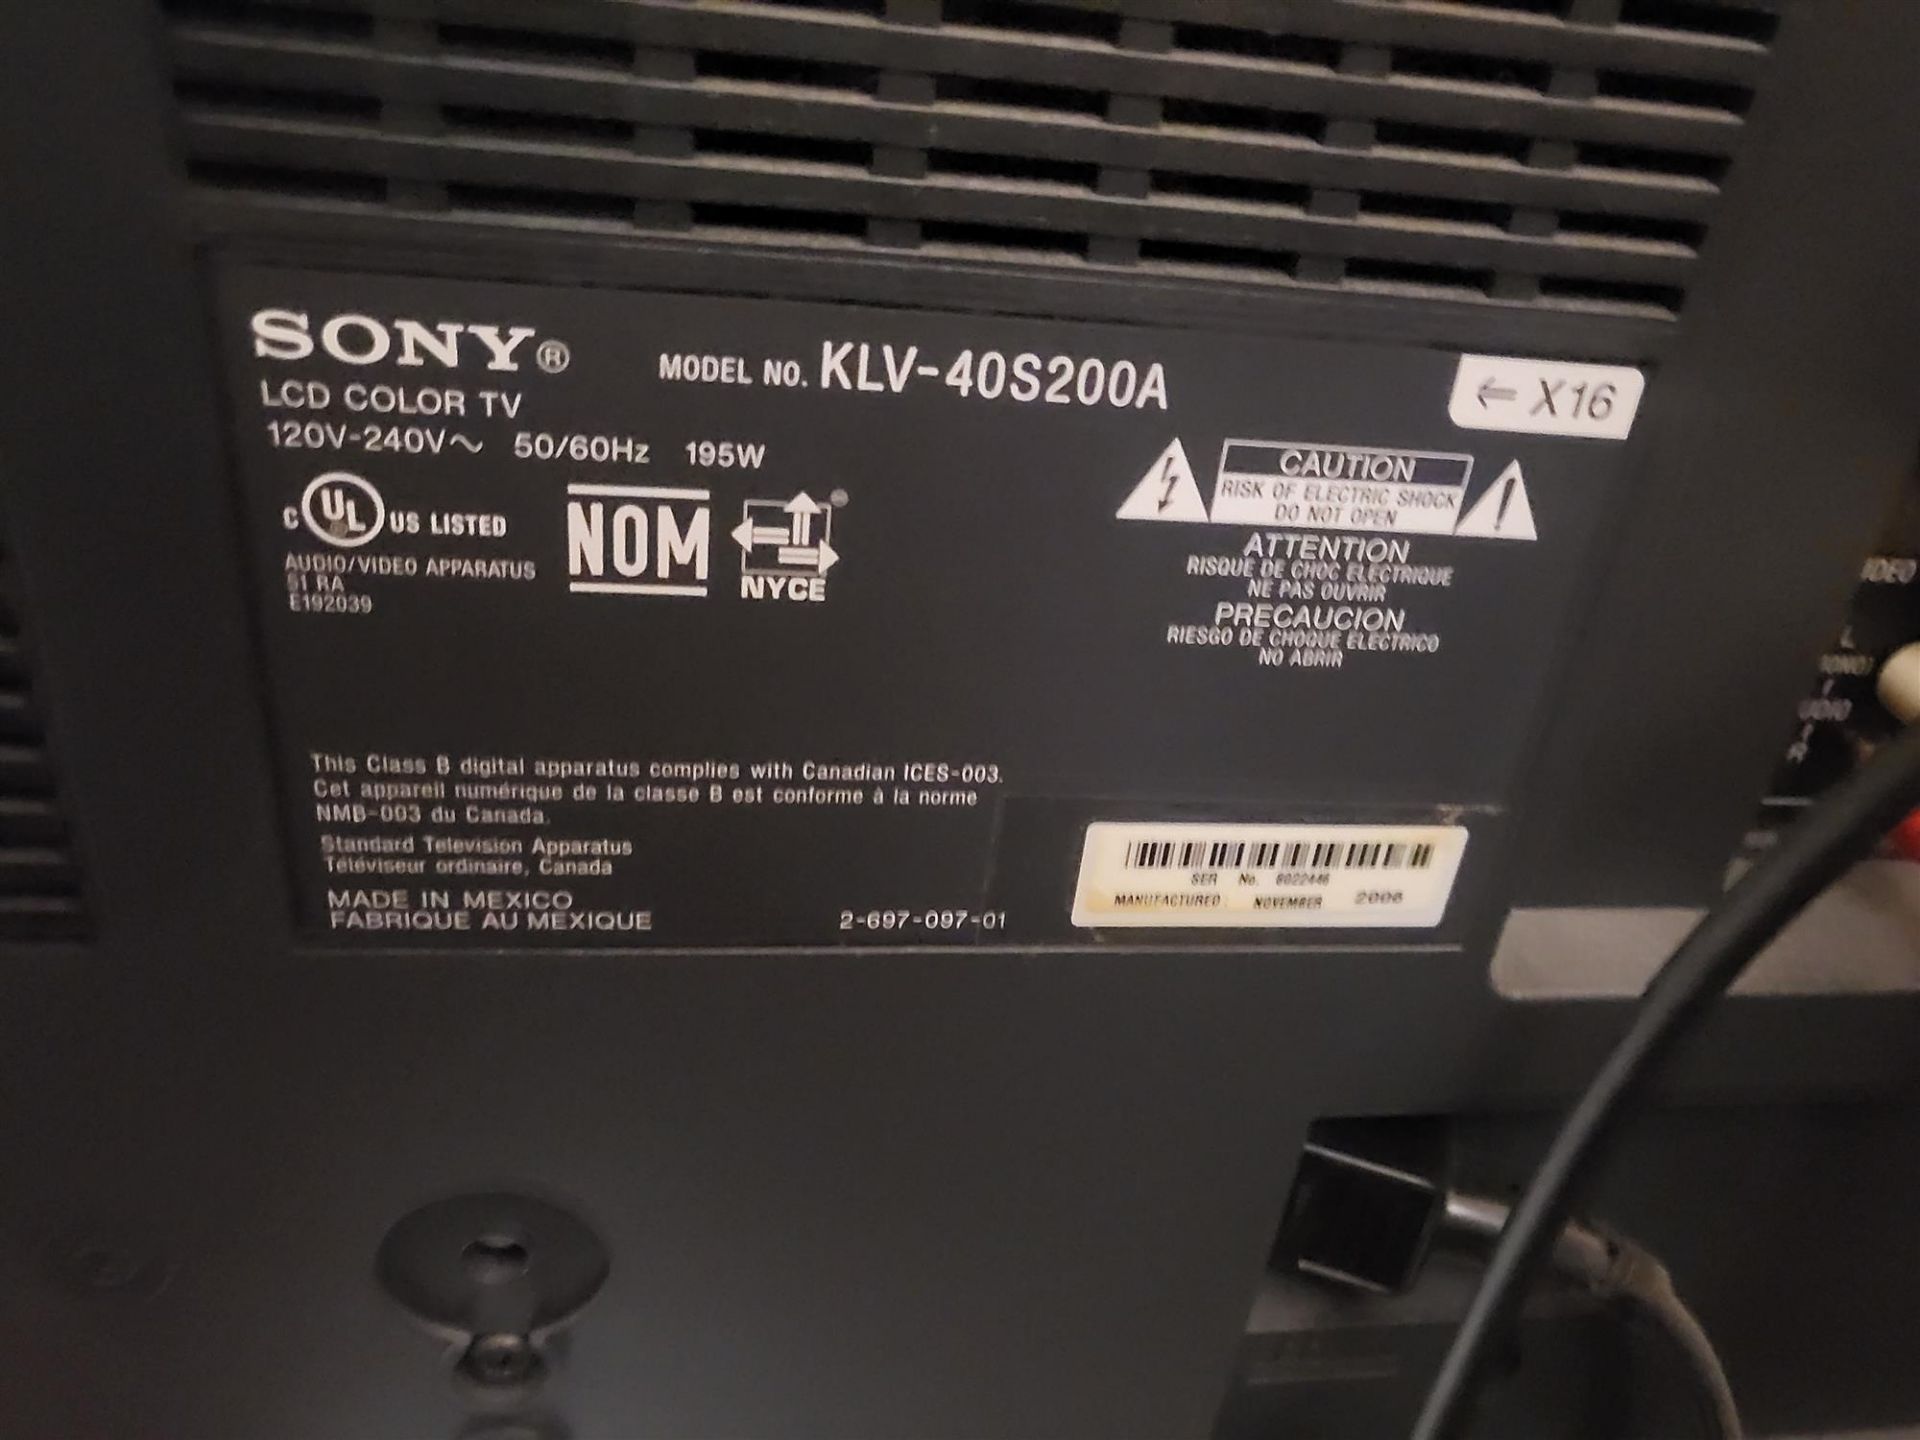 SONY - LCD Color TV - Mo#: KLV-40S200A - Image 3 of 3